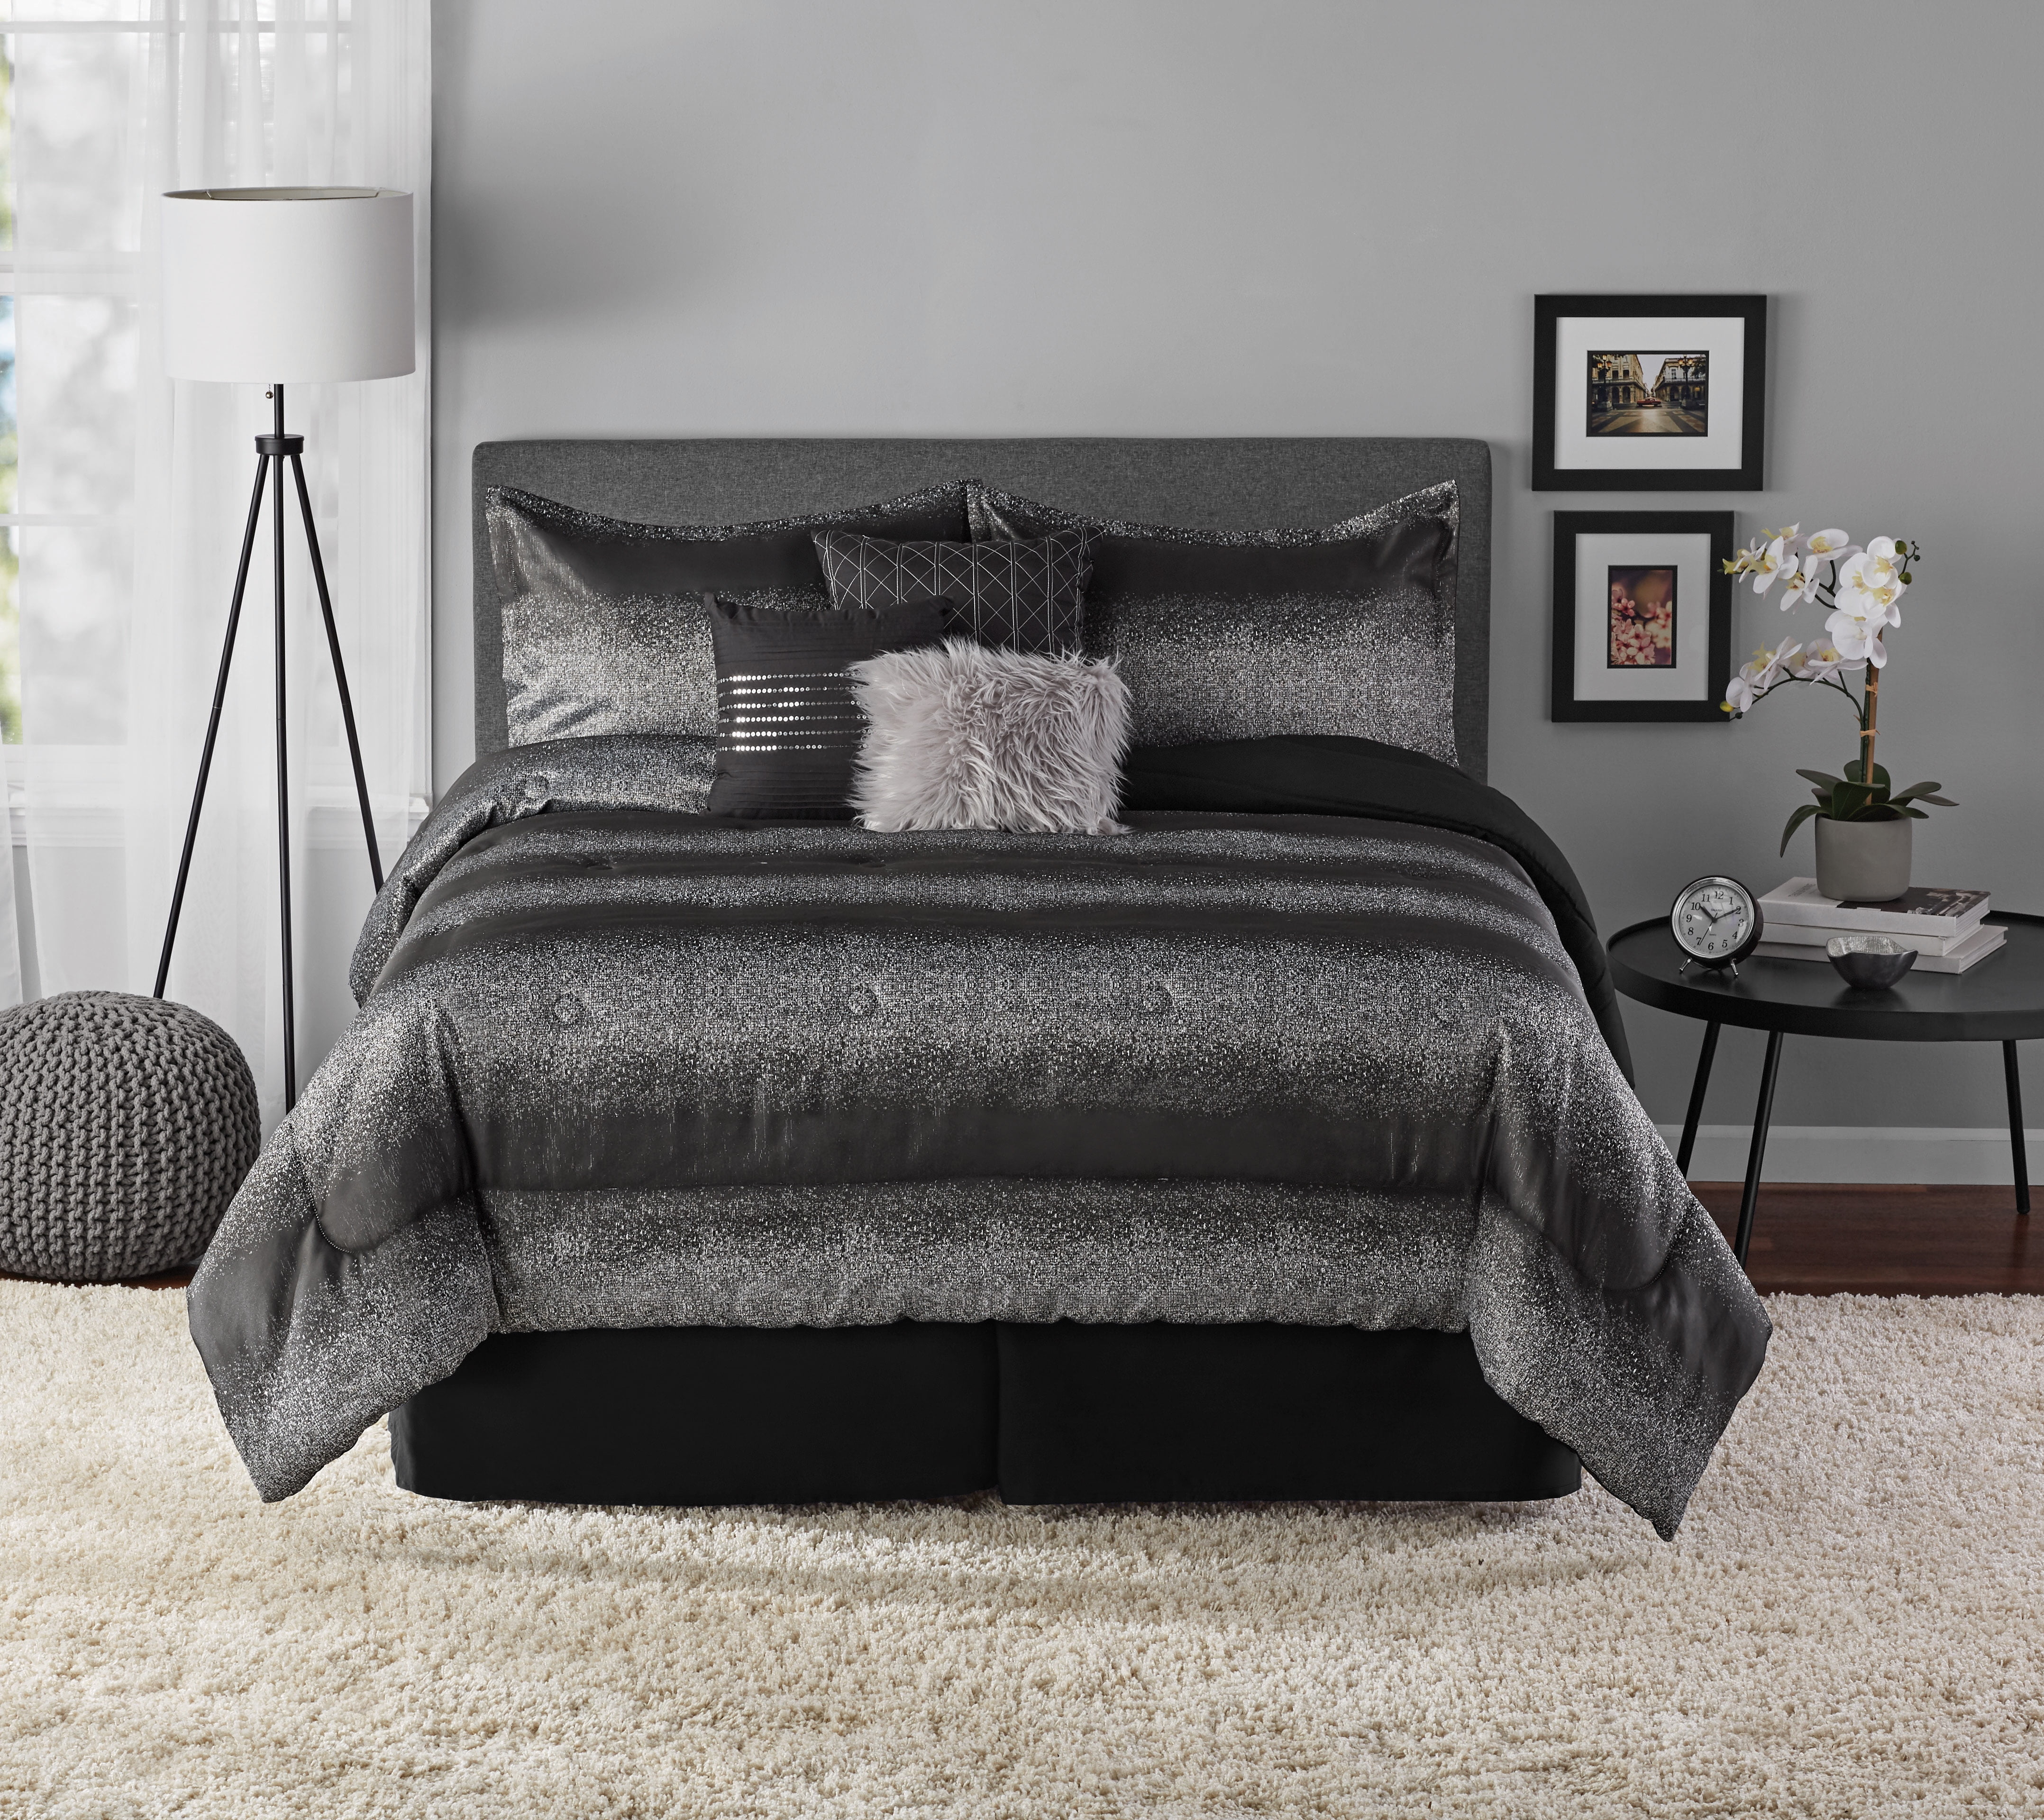 5 Sizes 8-Piece Luxury Stripe Comforter Set Bed-In-A-Bag Gray 